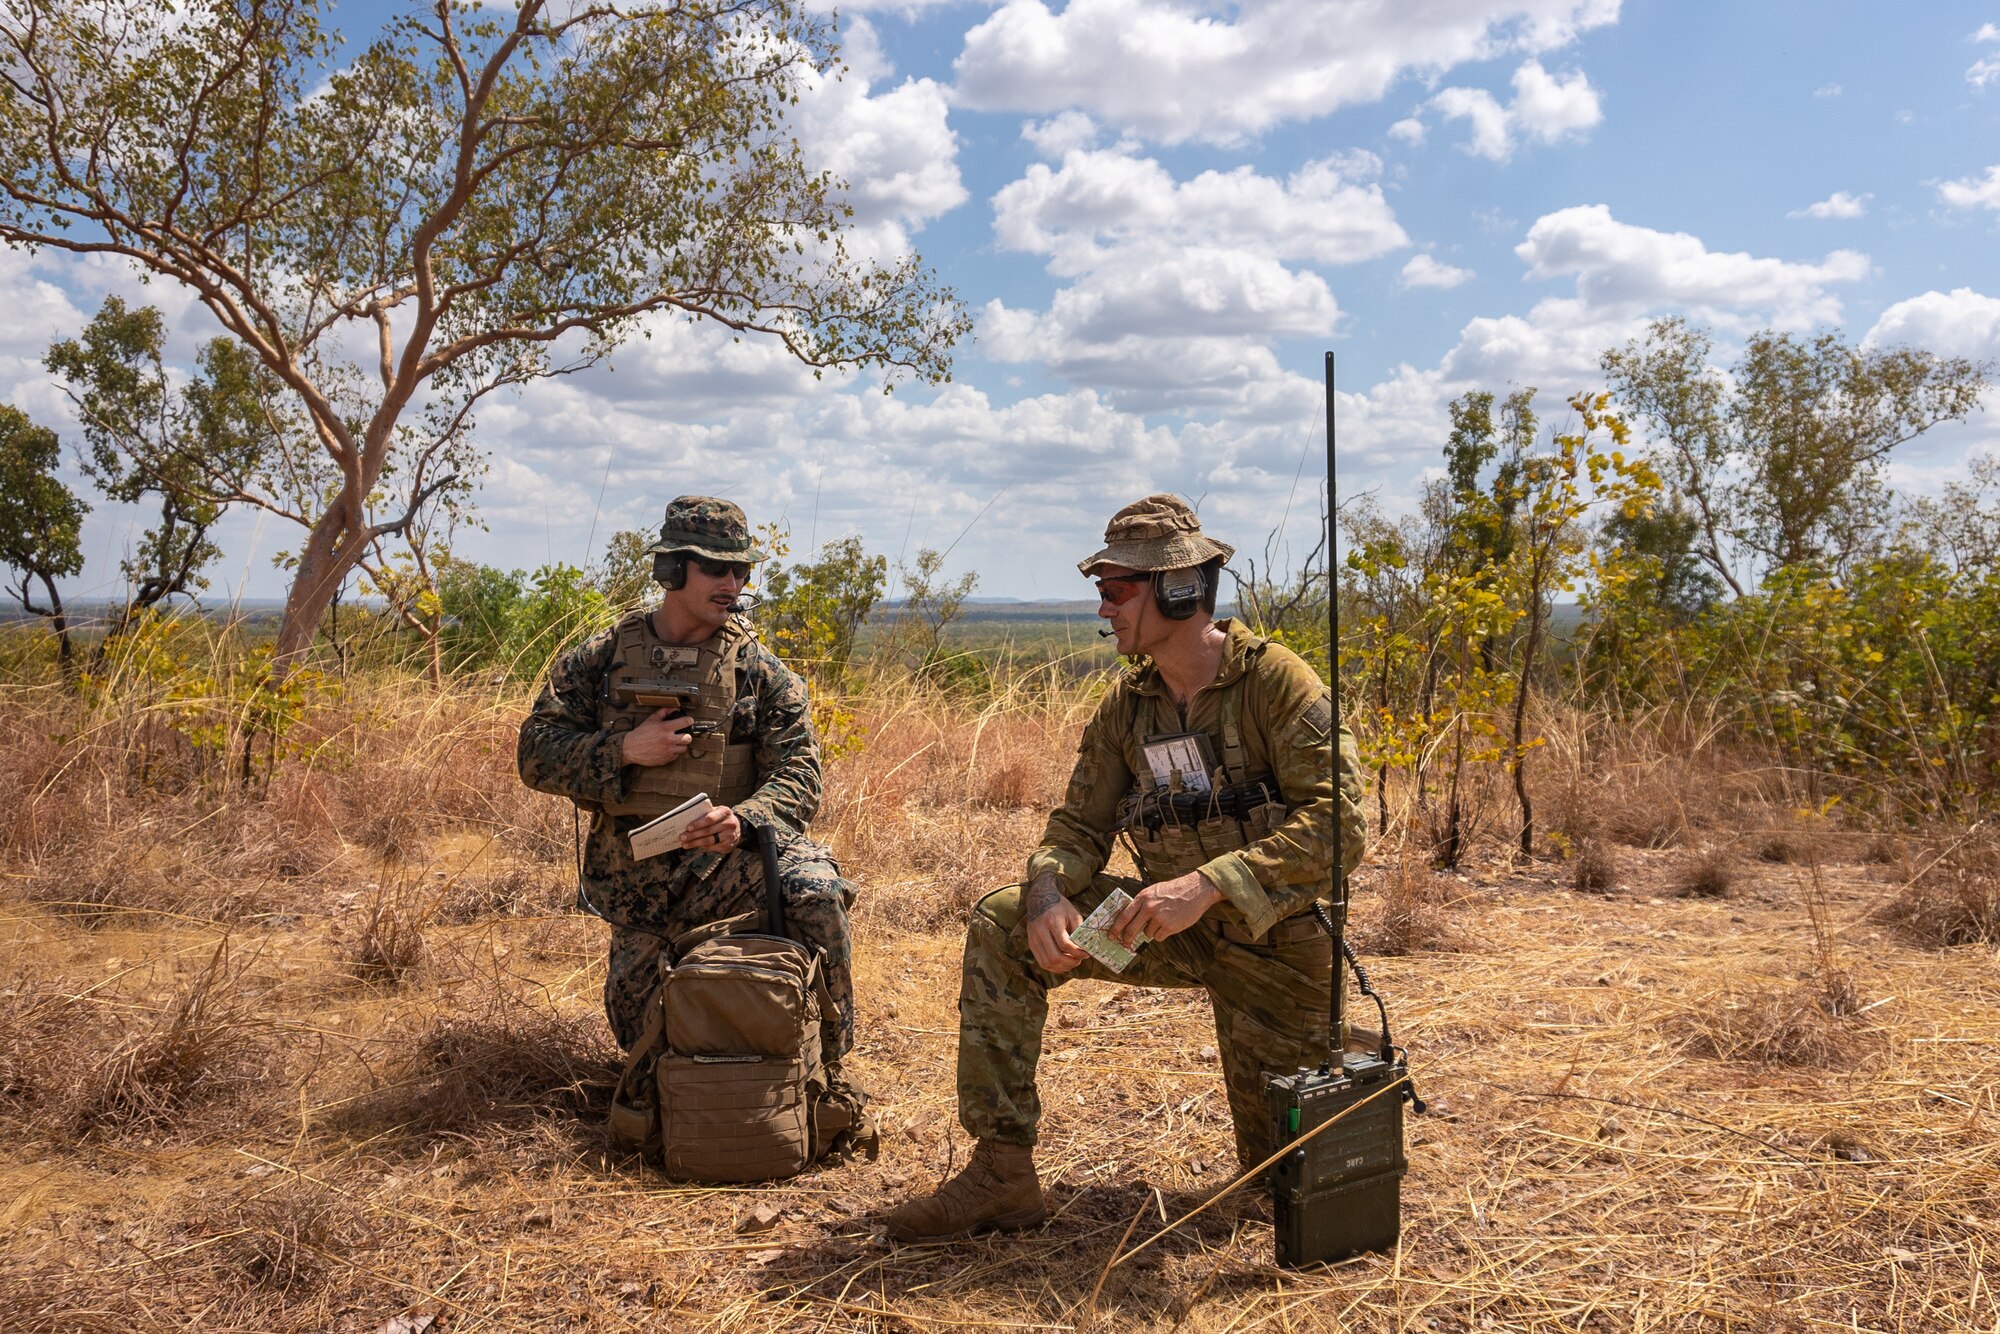 U.S. Marine Corps Staff Sgt. Micheal Mendoza, a joint terminal attack controller with Command Element, Marine Rotational Force - Darwin, left, and Australian Defence Force Sgt. Aaron Costas, with 102nd Coral Battery, communicate to a B-1B Lancer pilot at Mount Bundey Training Area, Northern Territory, Australia, Aug. 14, 2020. The combined training allowed both Marines and Australian Defence Force members to learn how to communicate effectively to be ready to work together to to contribute to regional security. (U.S. Marine Corps photo by Cpl. Sarah Marshall)